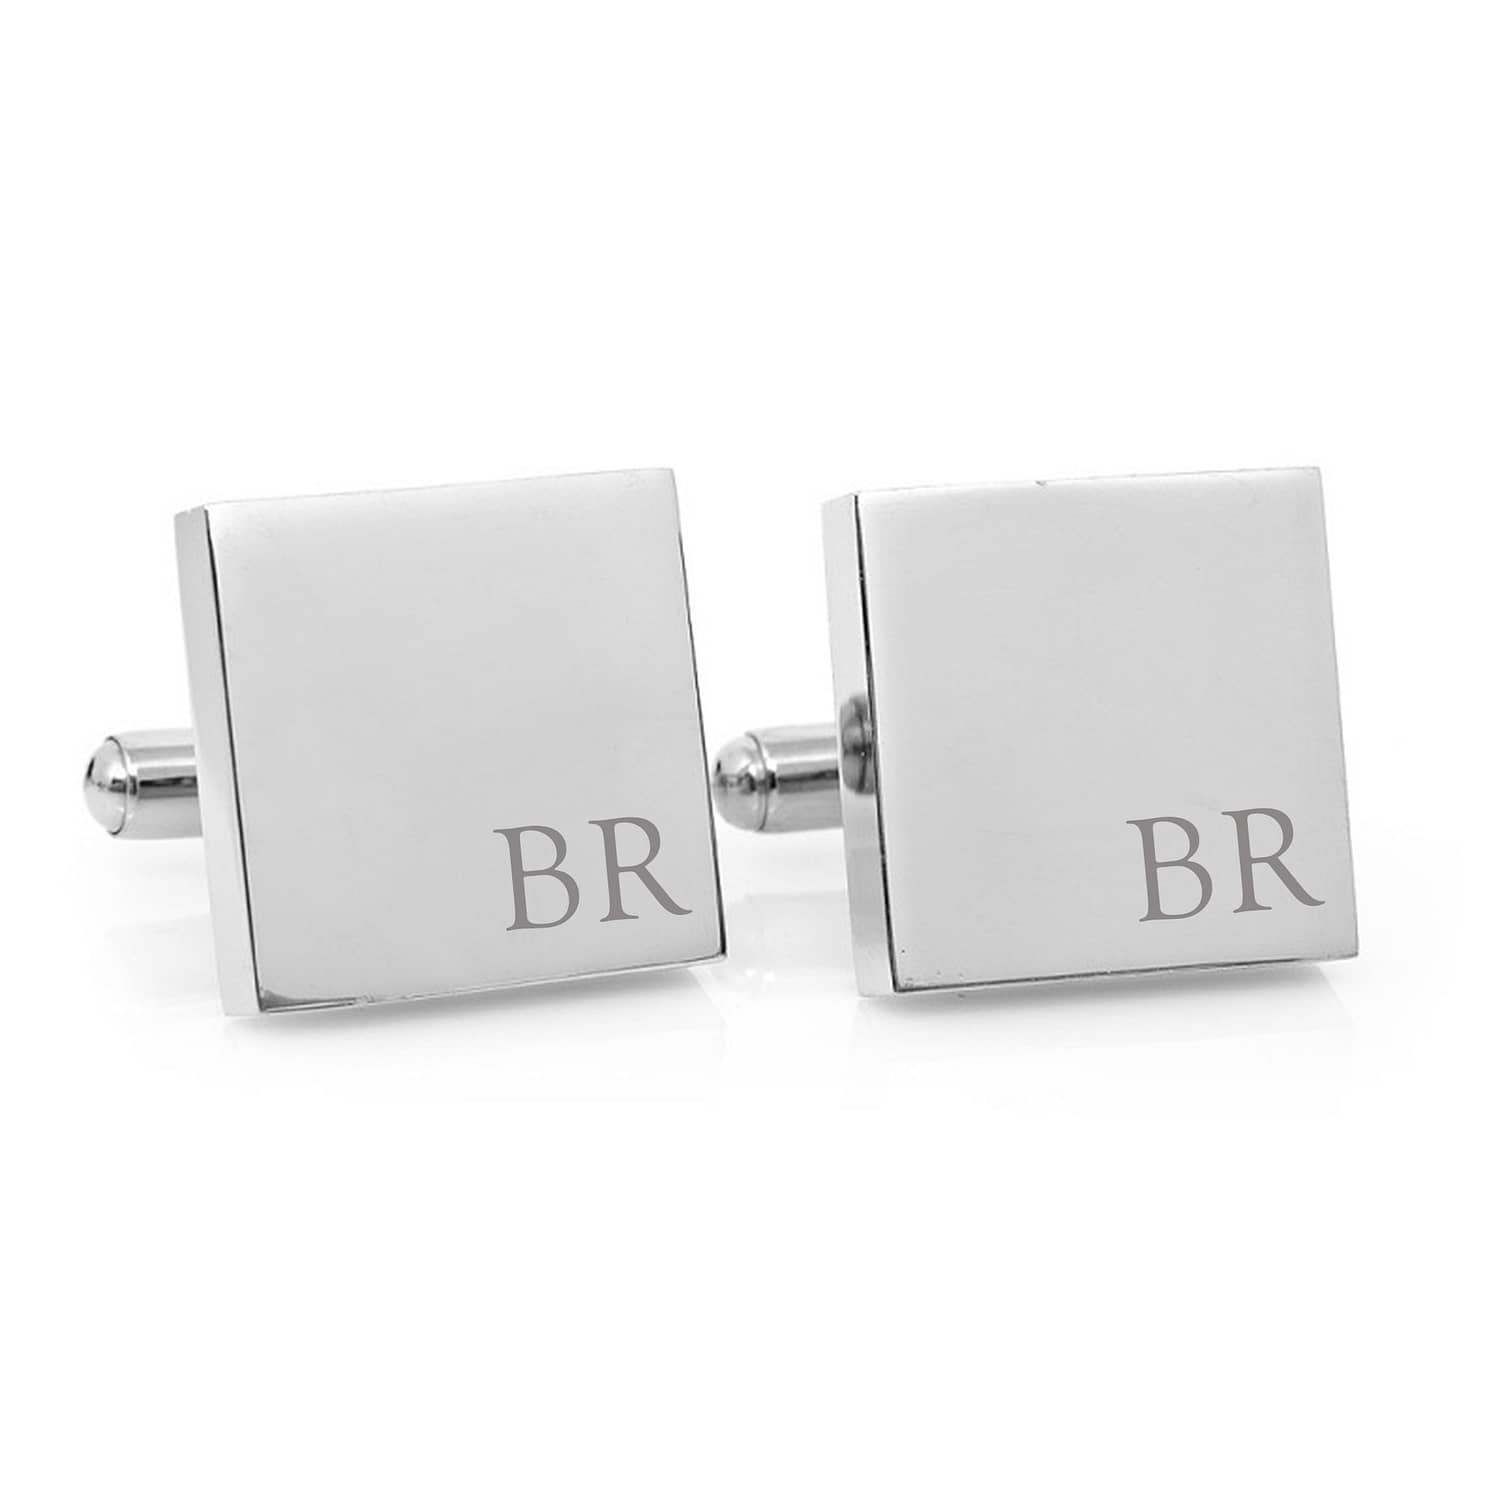 ATTACHMENT DETAILS Saved. engraved-initial-cufflinks.jpg August 30, 2018 116 KB 2000 × 2000 Edit Image Delete Permanently URL https://mlxdyqvt57gt.i.optimole.com/w:1500/h:1500/q:mauto/f:avif/https://thesilverstore.brushyourideas.com/wp-content/uploads/2018/08/engraved-initial-cufflinks.jpg Title